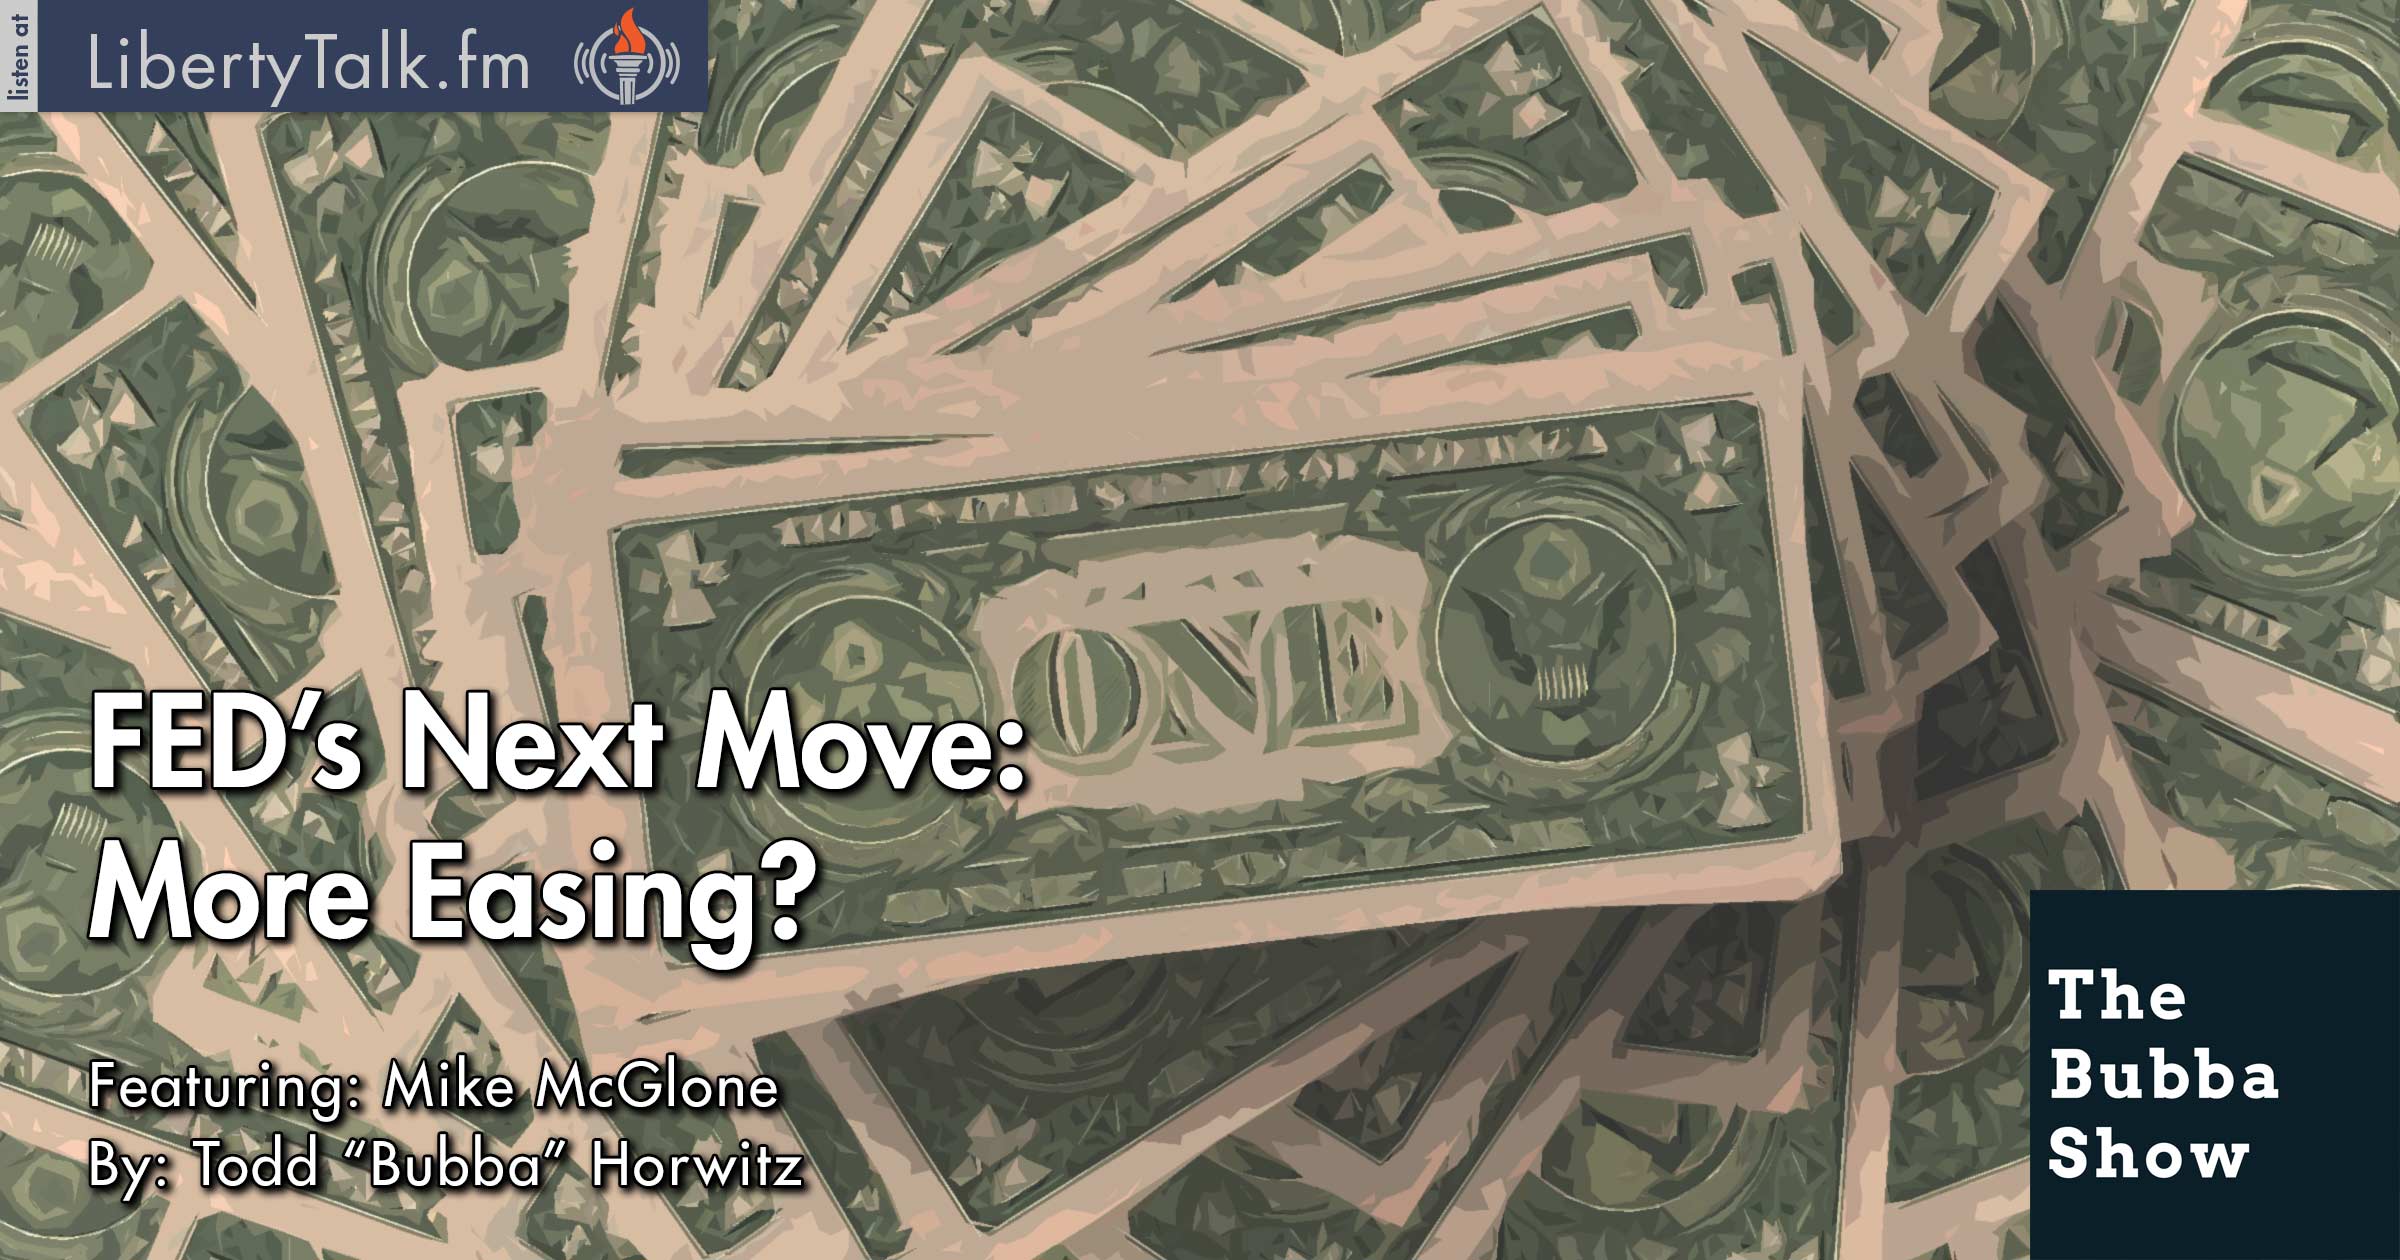 FED’s Next Move: More Easing? - The Bubba Show